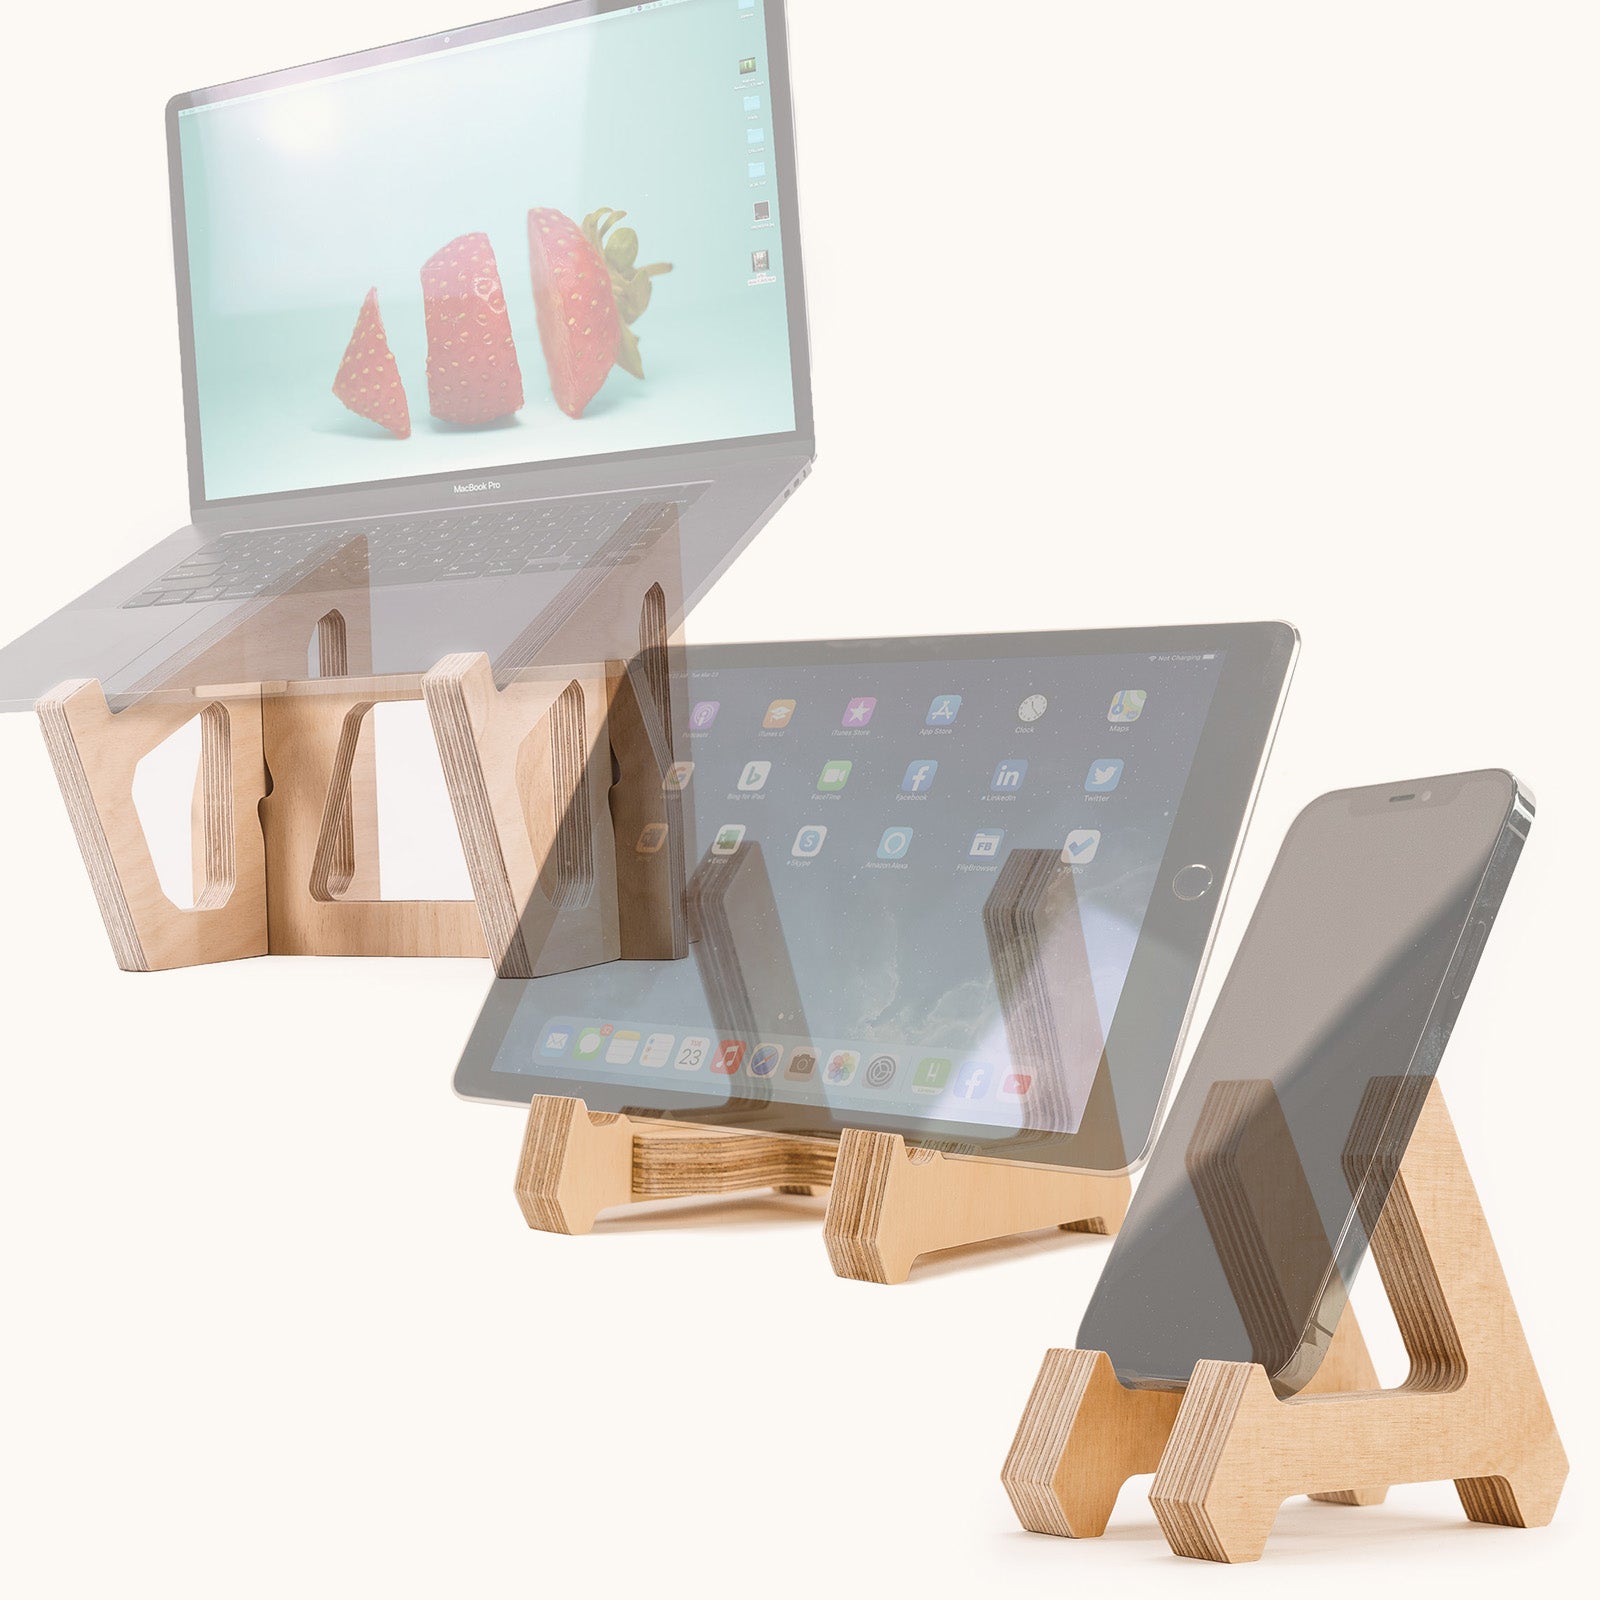 Birch Laptop Lifter, Tablet Stand, & Phone Stand